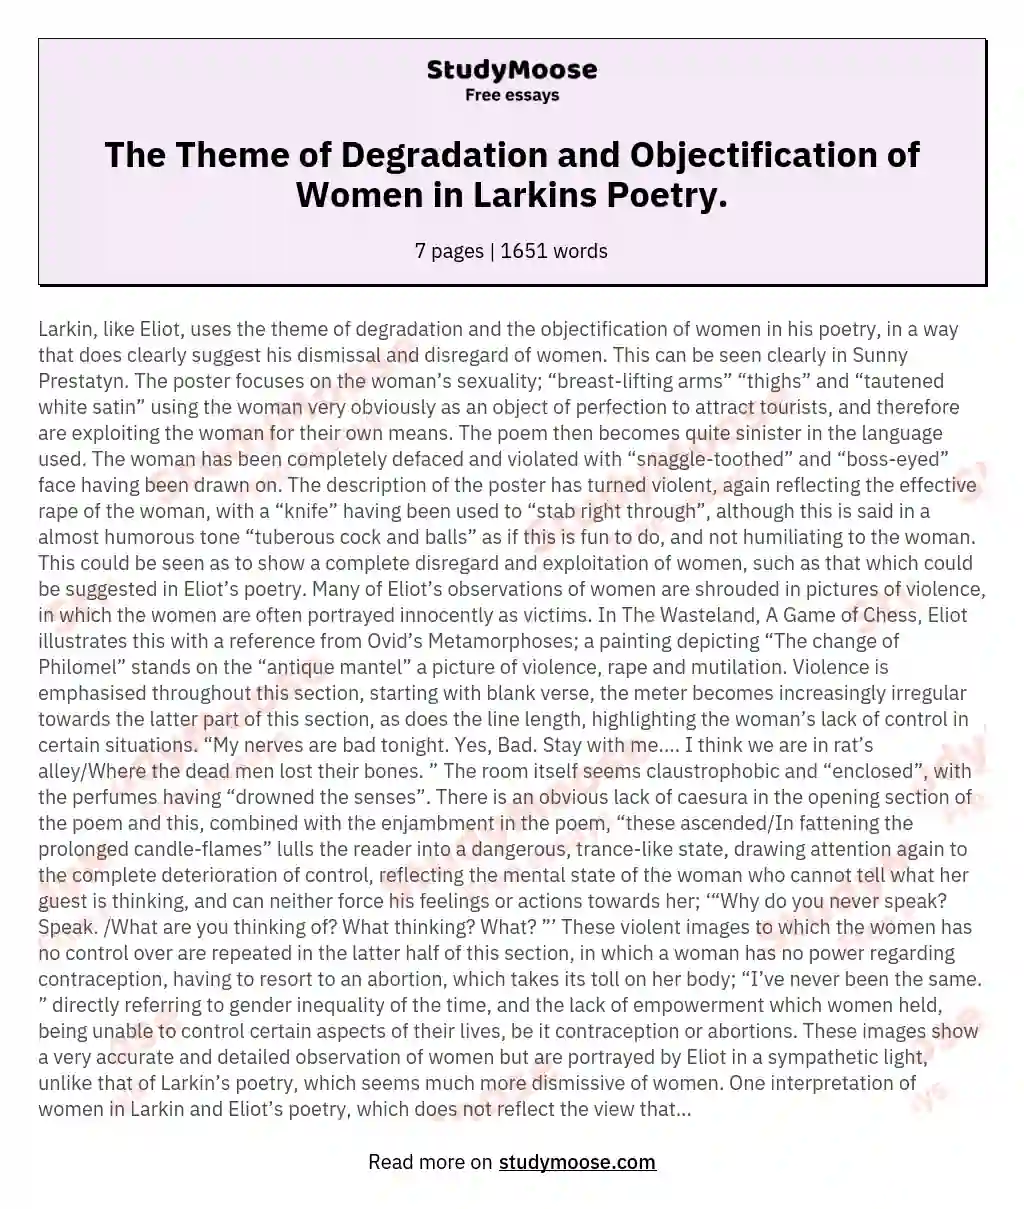 The Theme of Degradation and Objectification of Women in Larkins Poetry. essay